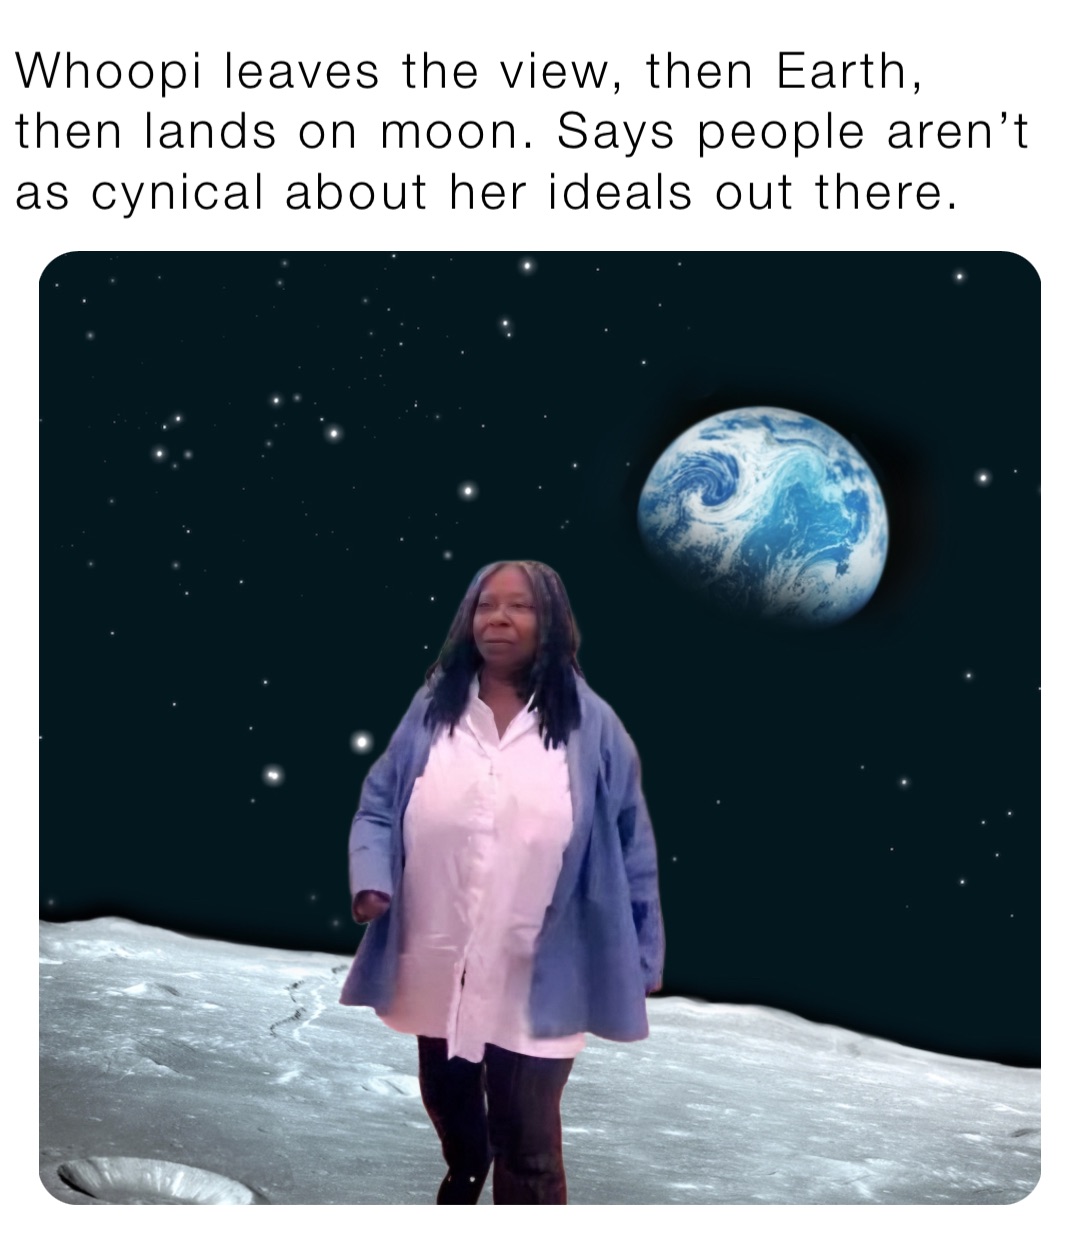 Whoopi leaves the view, then Earth, then lands on moon. Says people aren’t as cynical about her ideals out there.